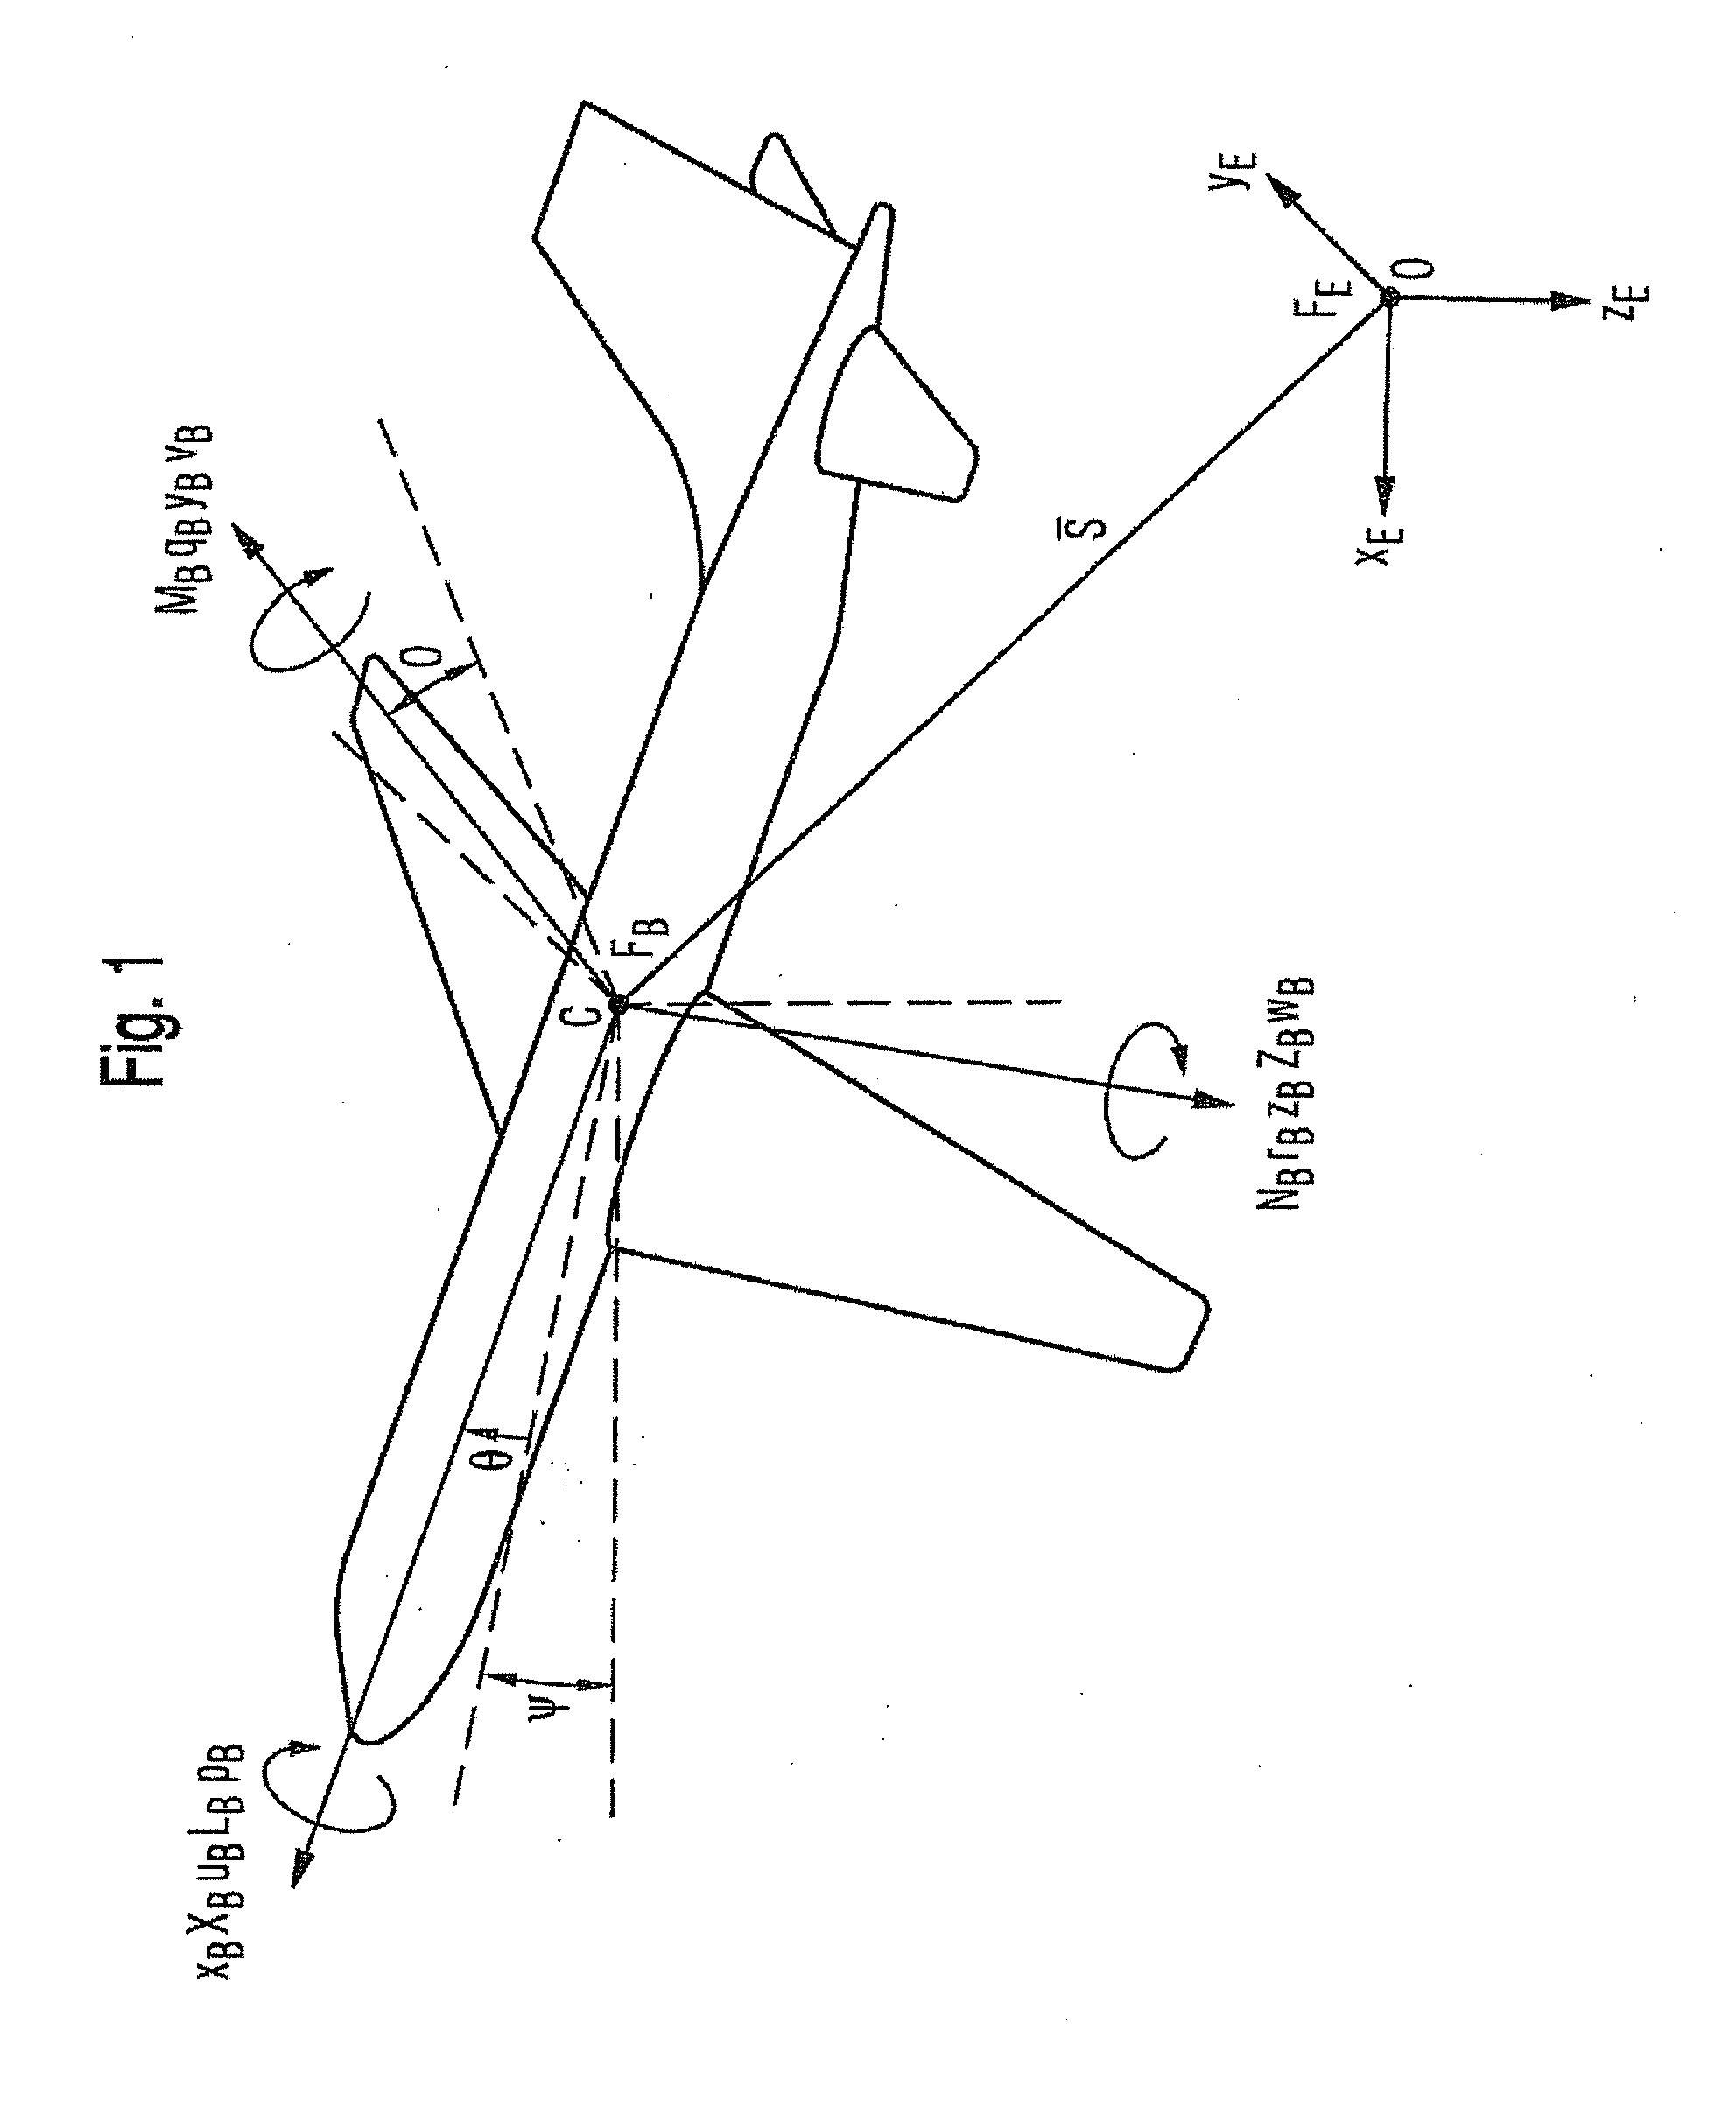 System and method for determining local accelerations, dynamic load distributions and aerodynamic data in an aircraft